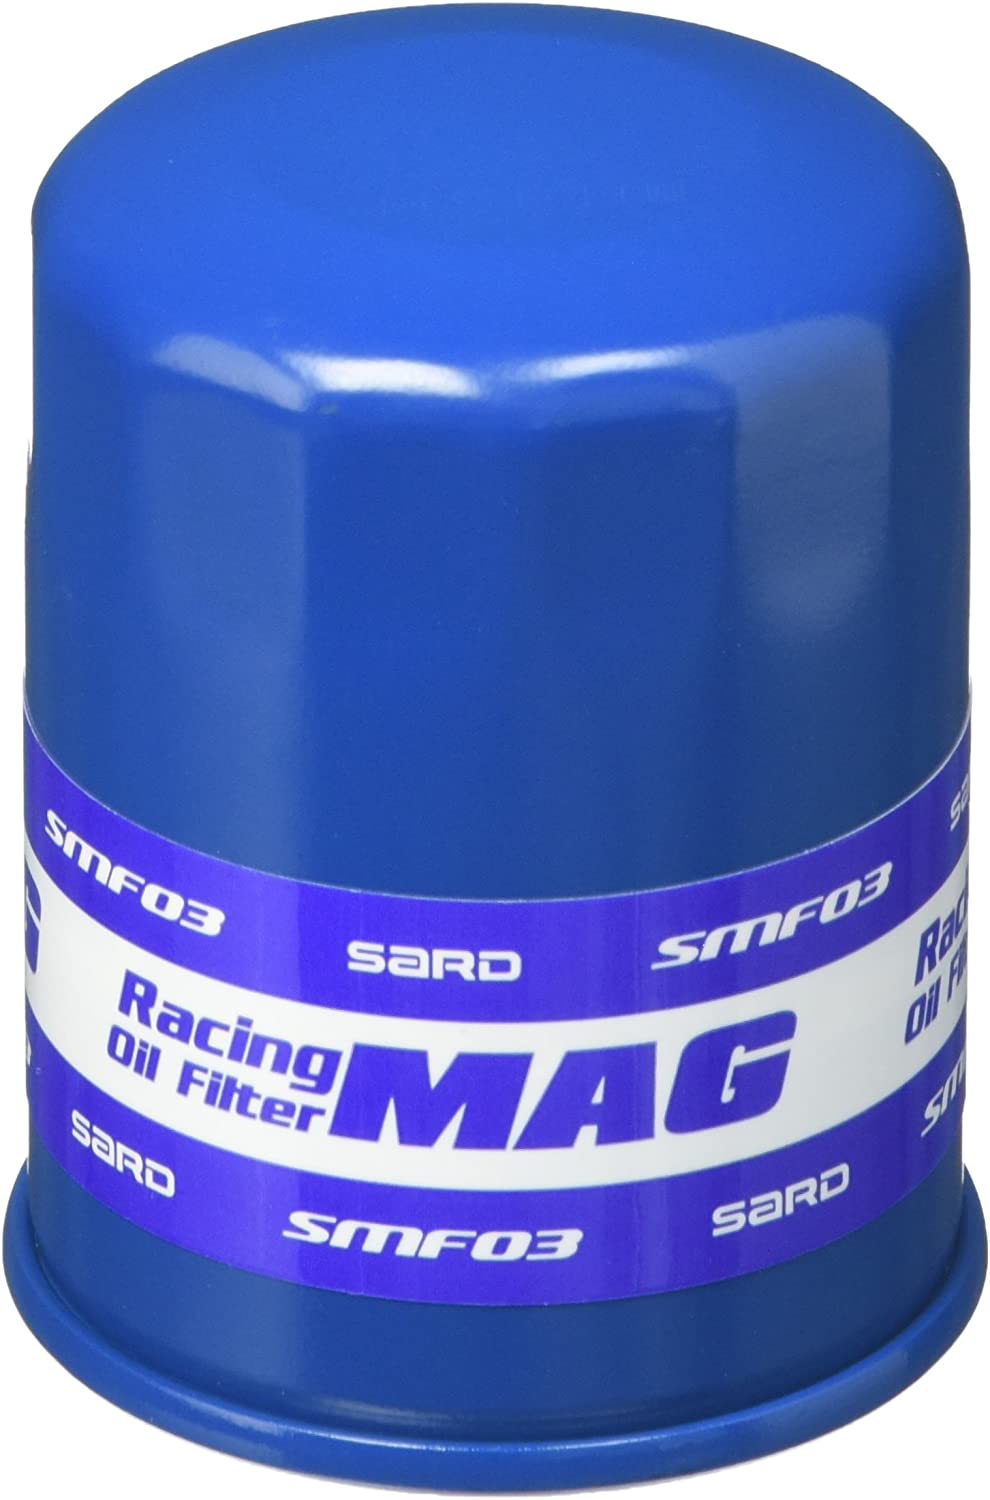 SARD RACING OIL FILTER For Z PA1 SMF01